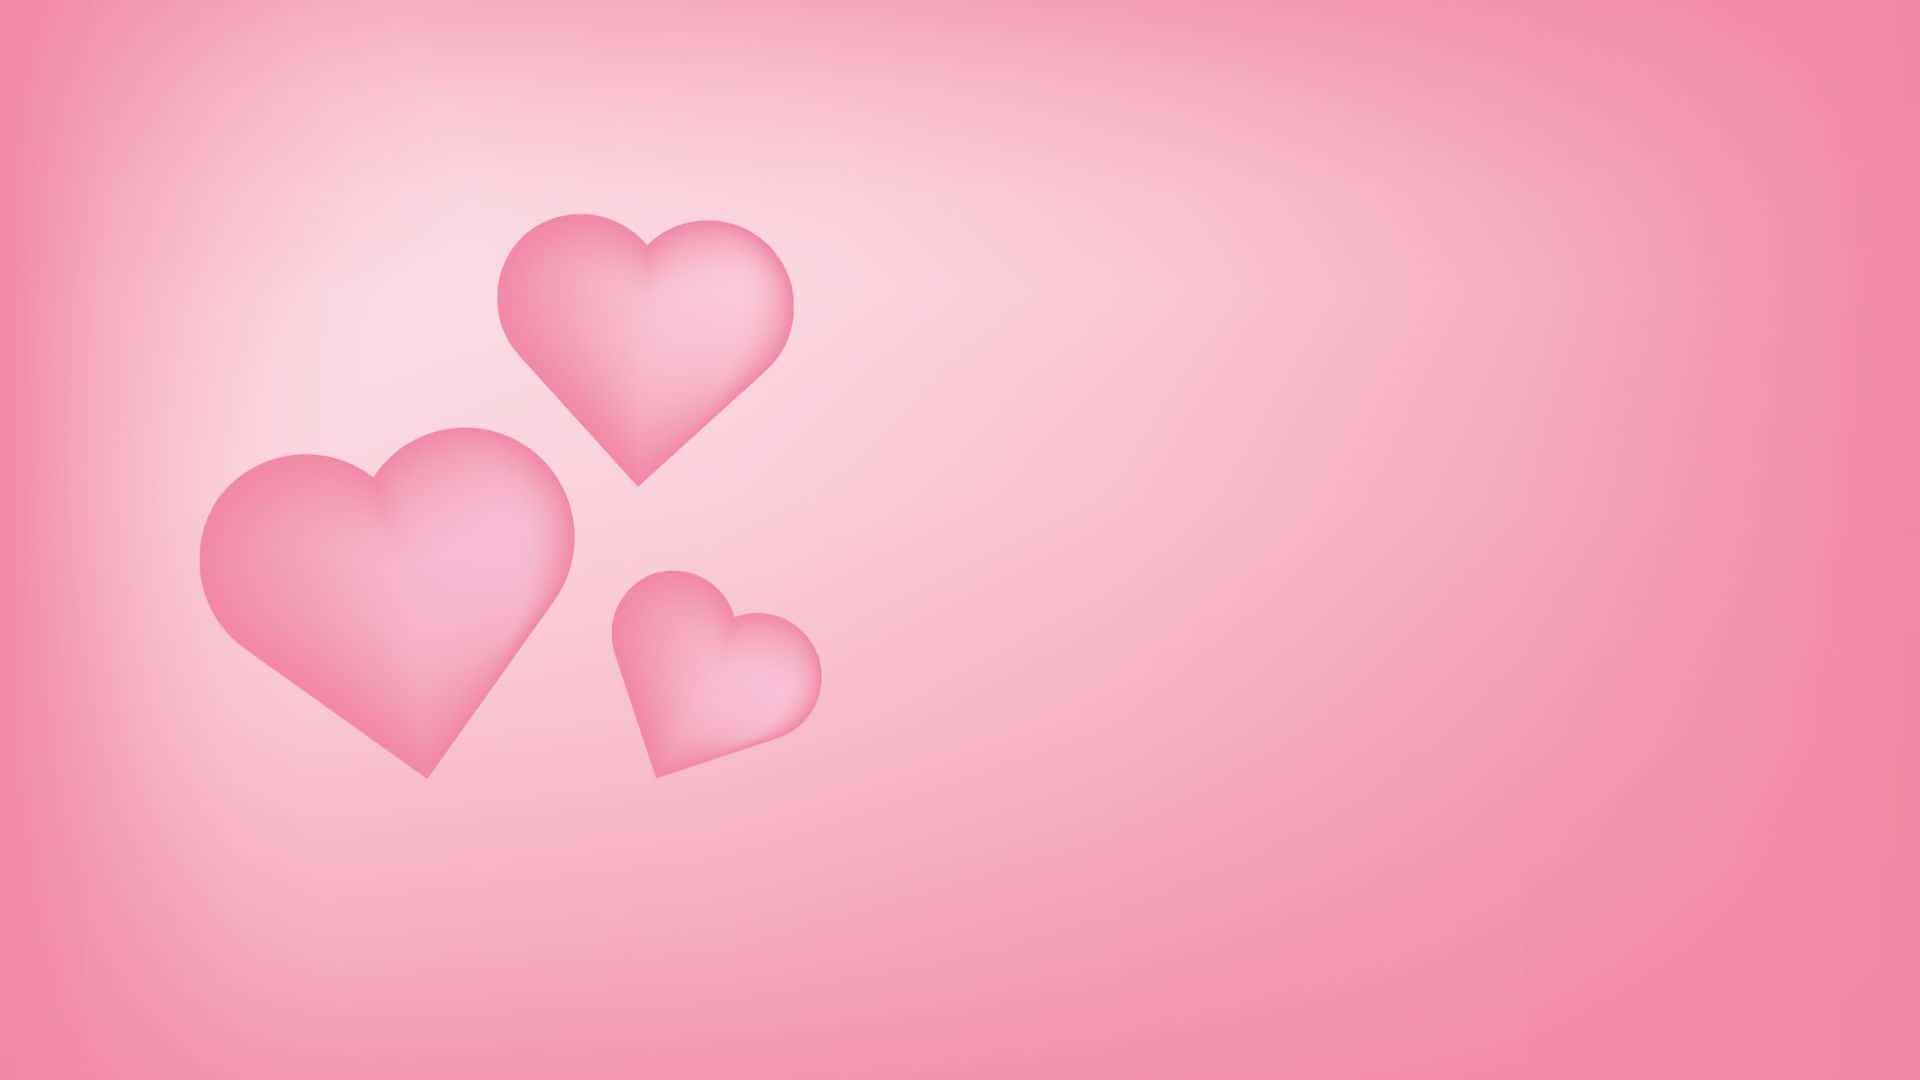 Pink Love - A Romantic Expression Wallpaper